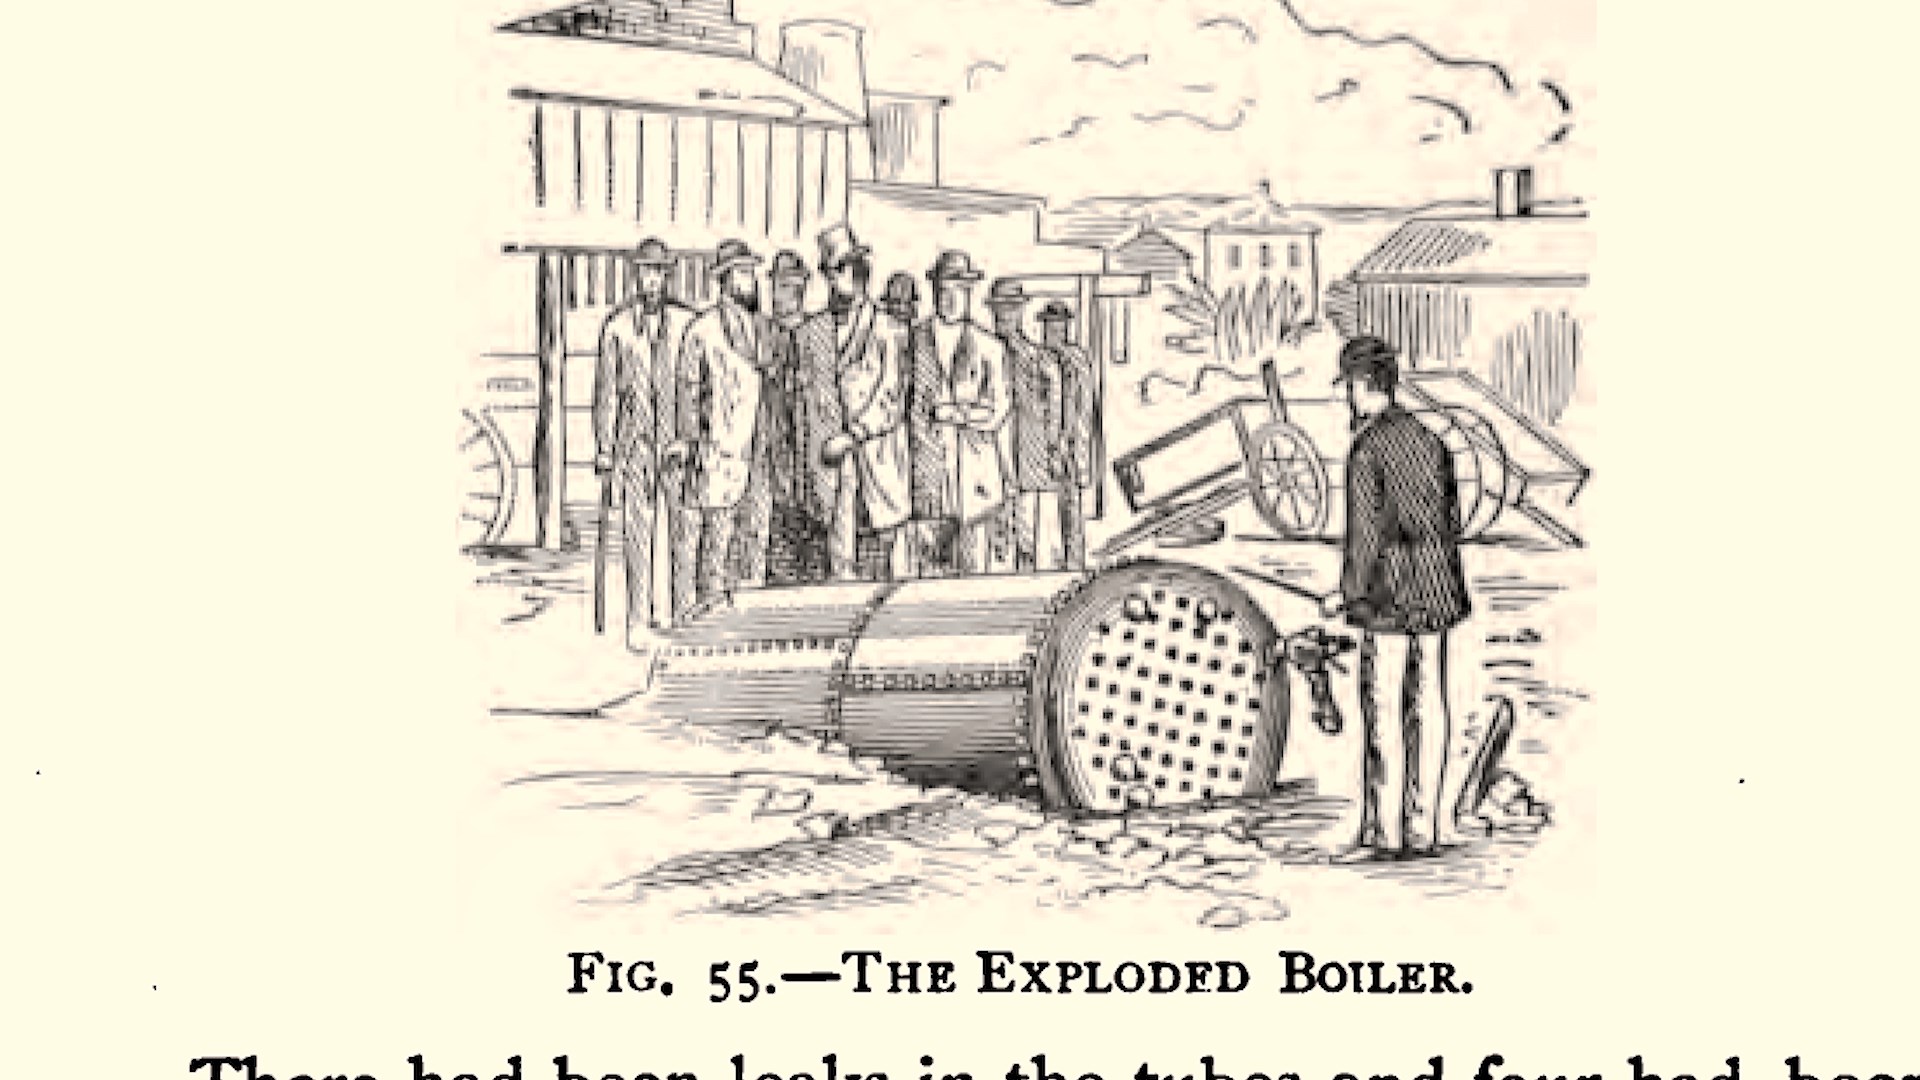 Illustration of an exploded boiler from the Grover Factory File